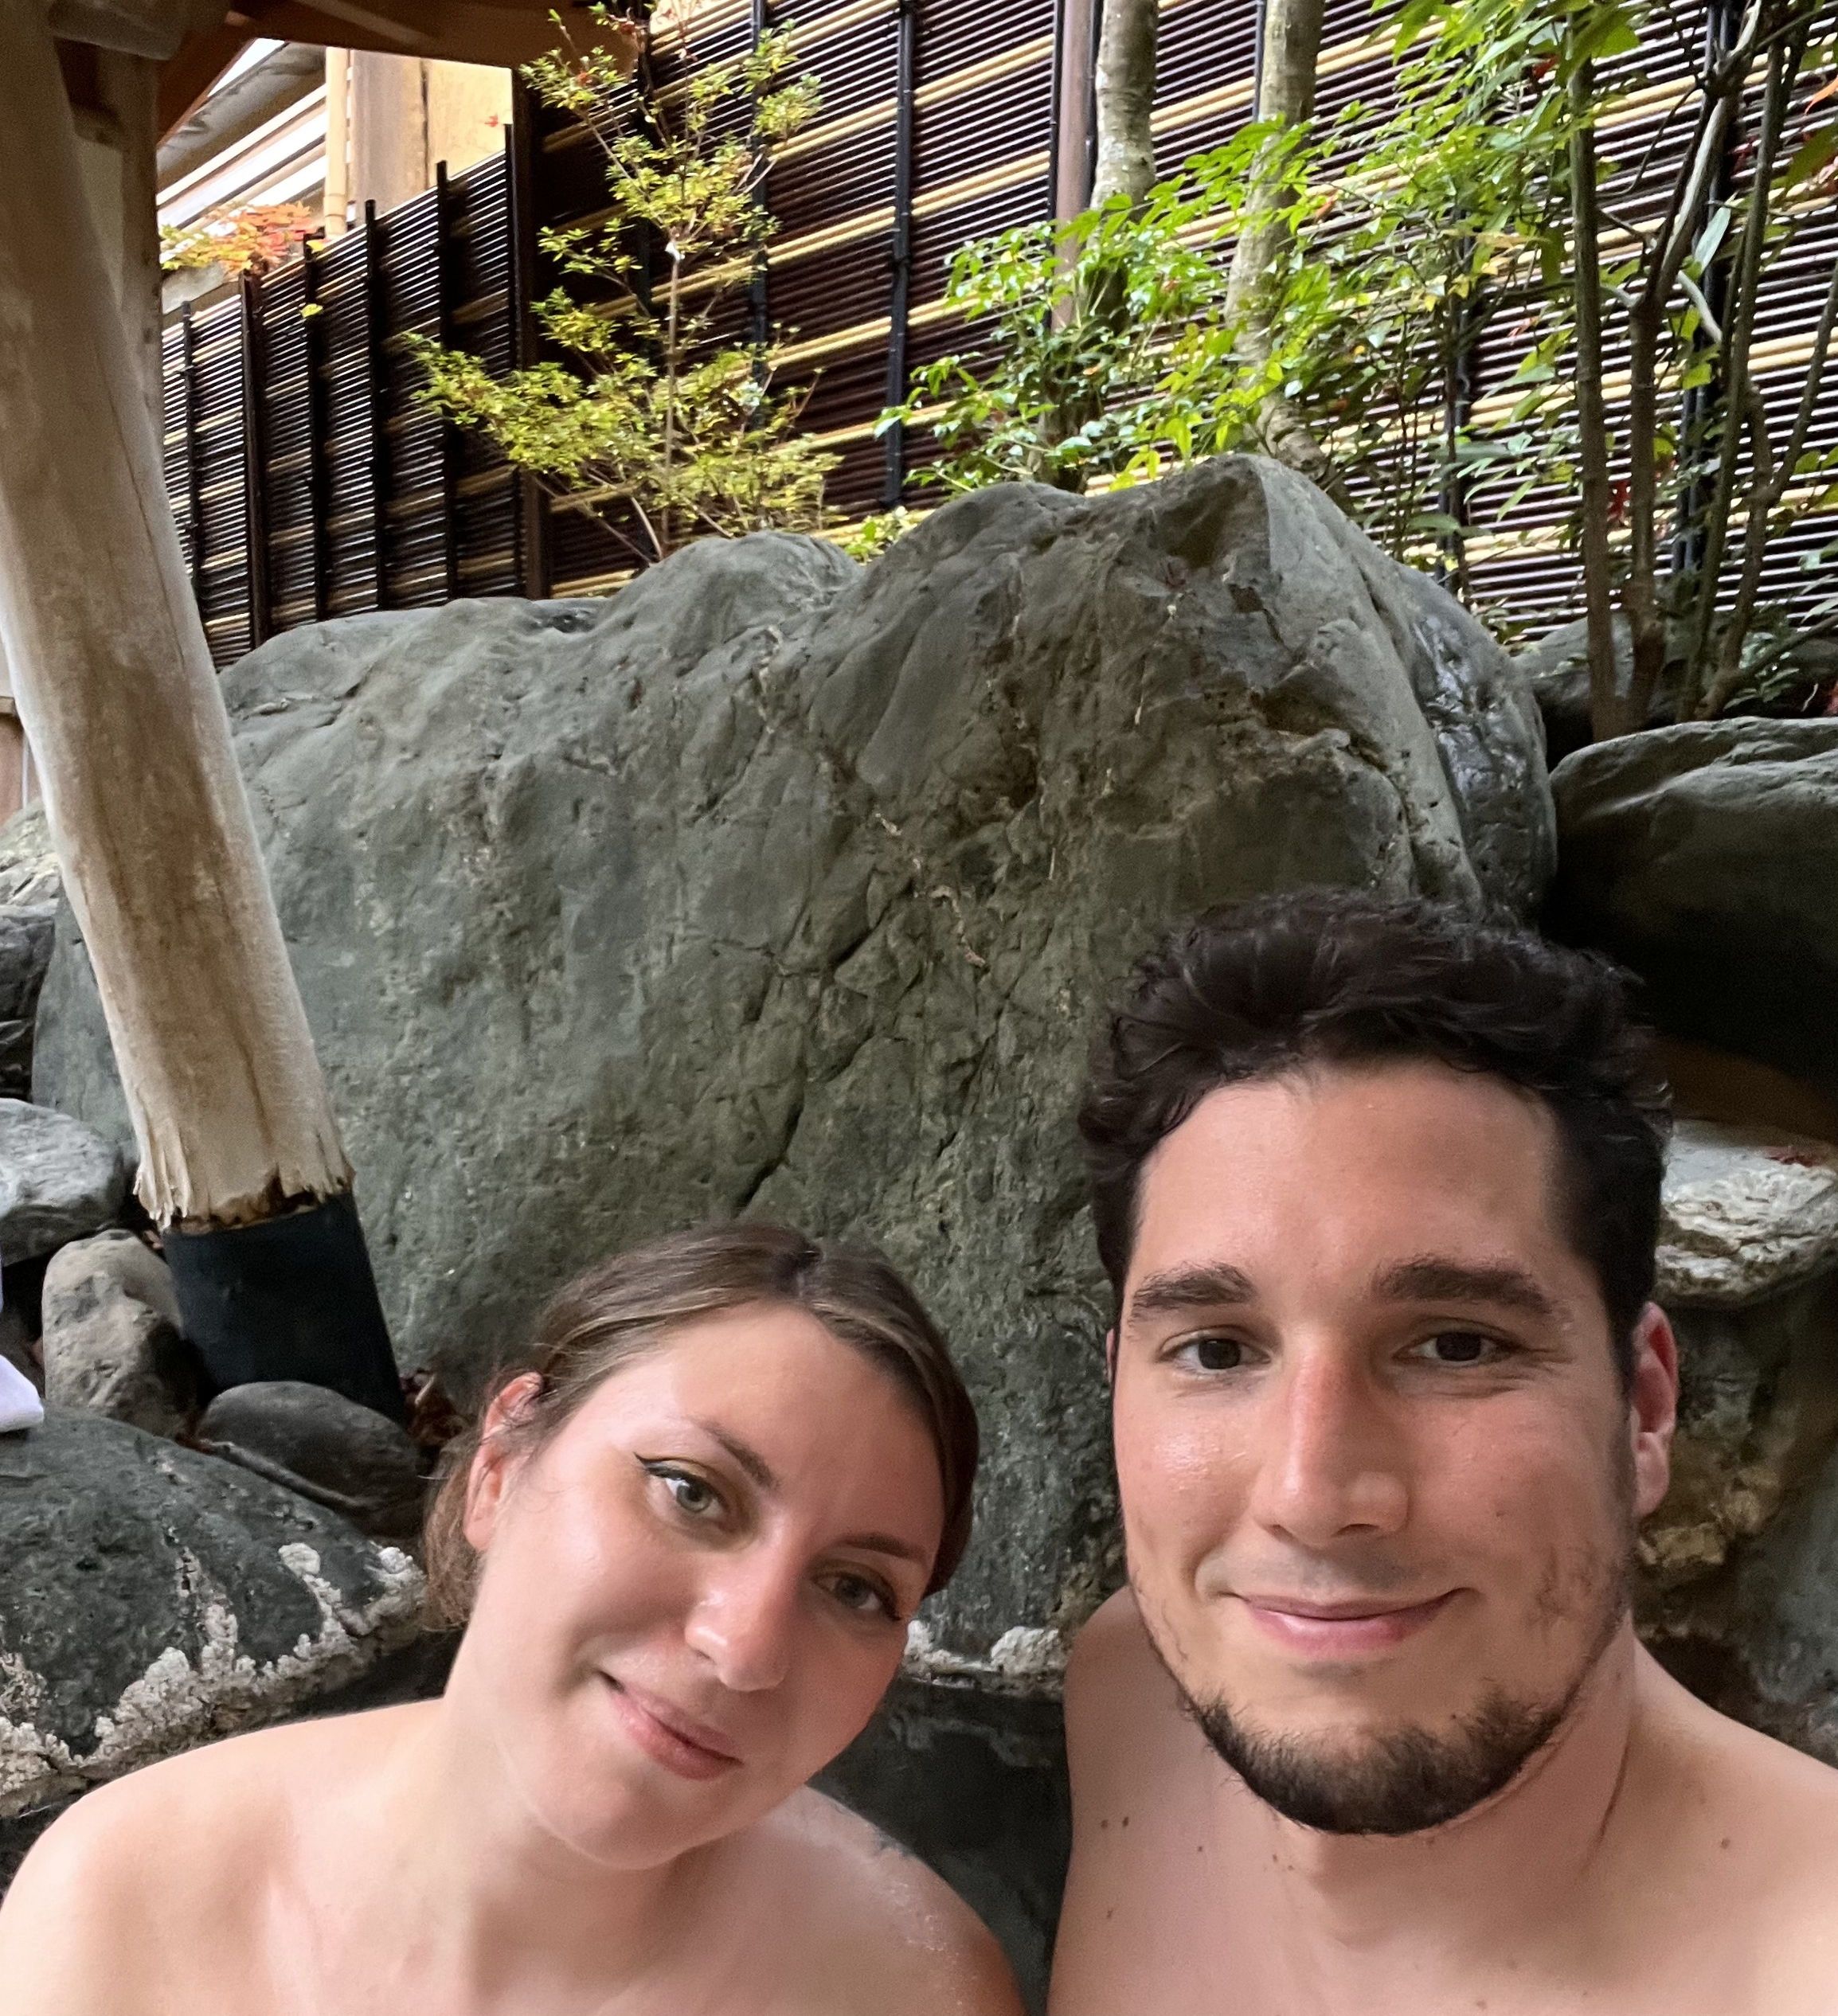 Cory and Greg from You Could Travel in a private onsen with Cory's tattoo visible on her shoulder and back